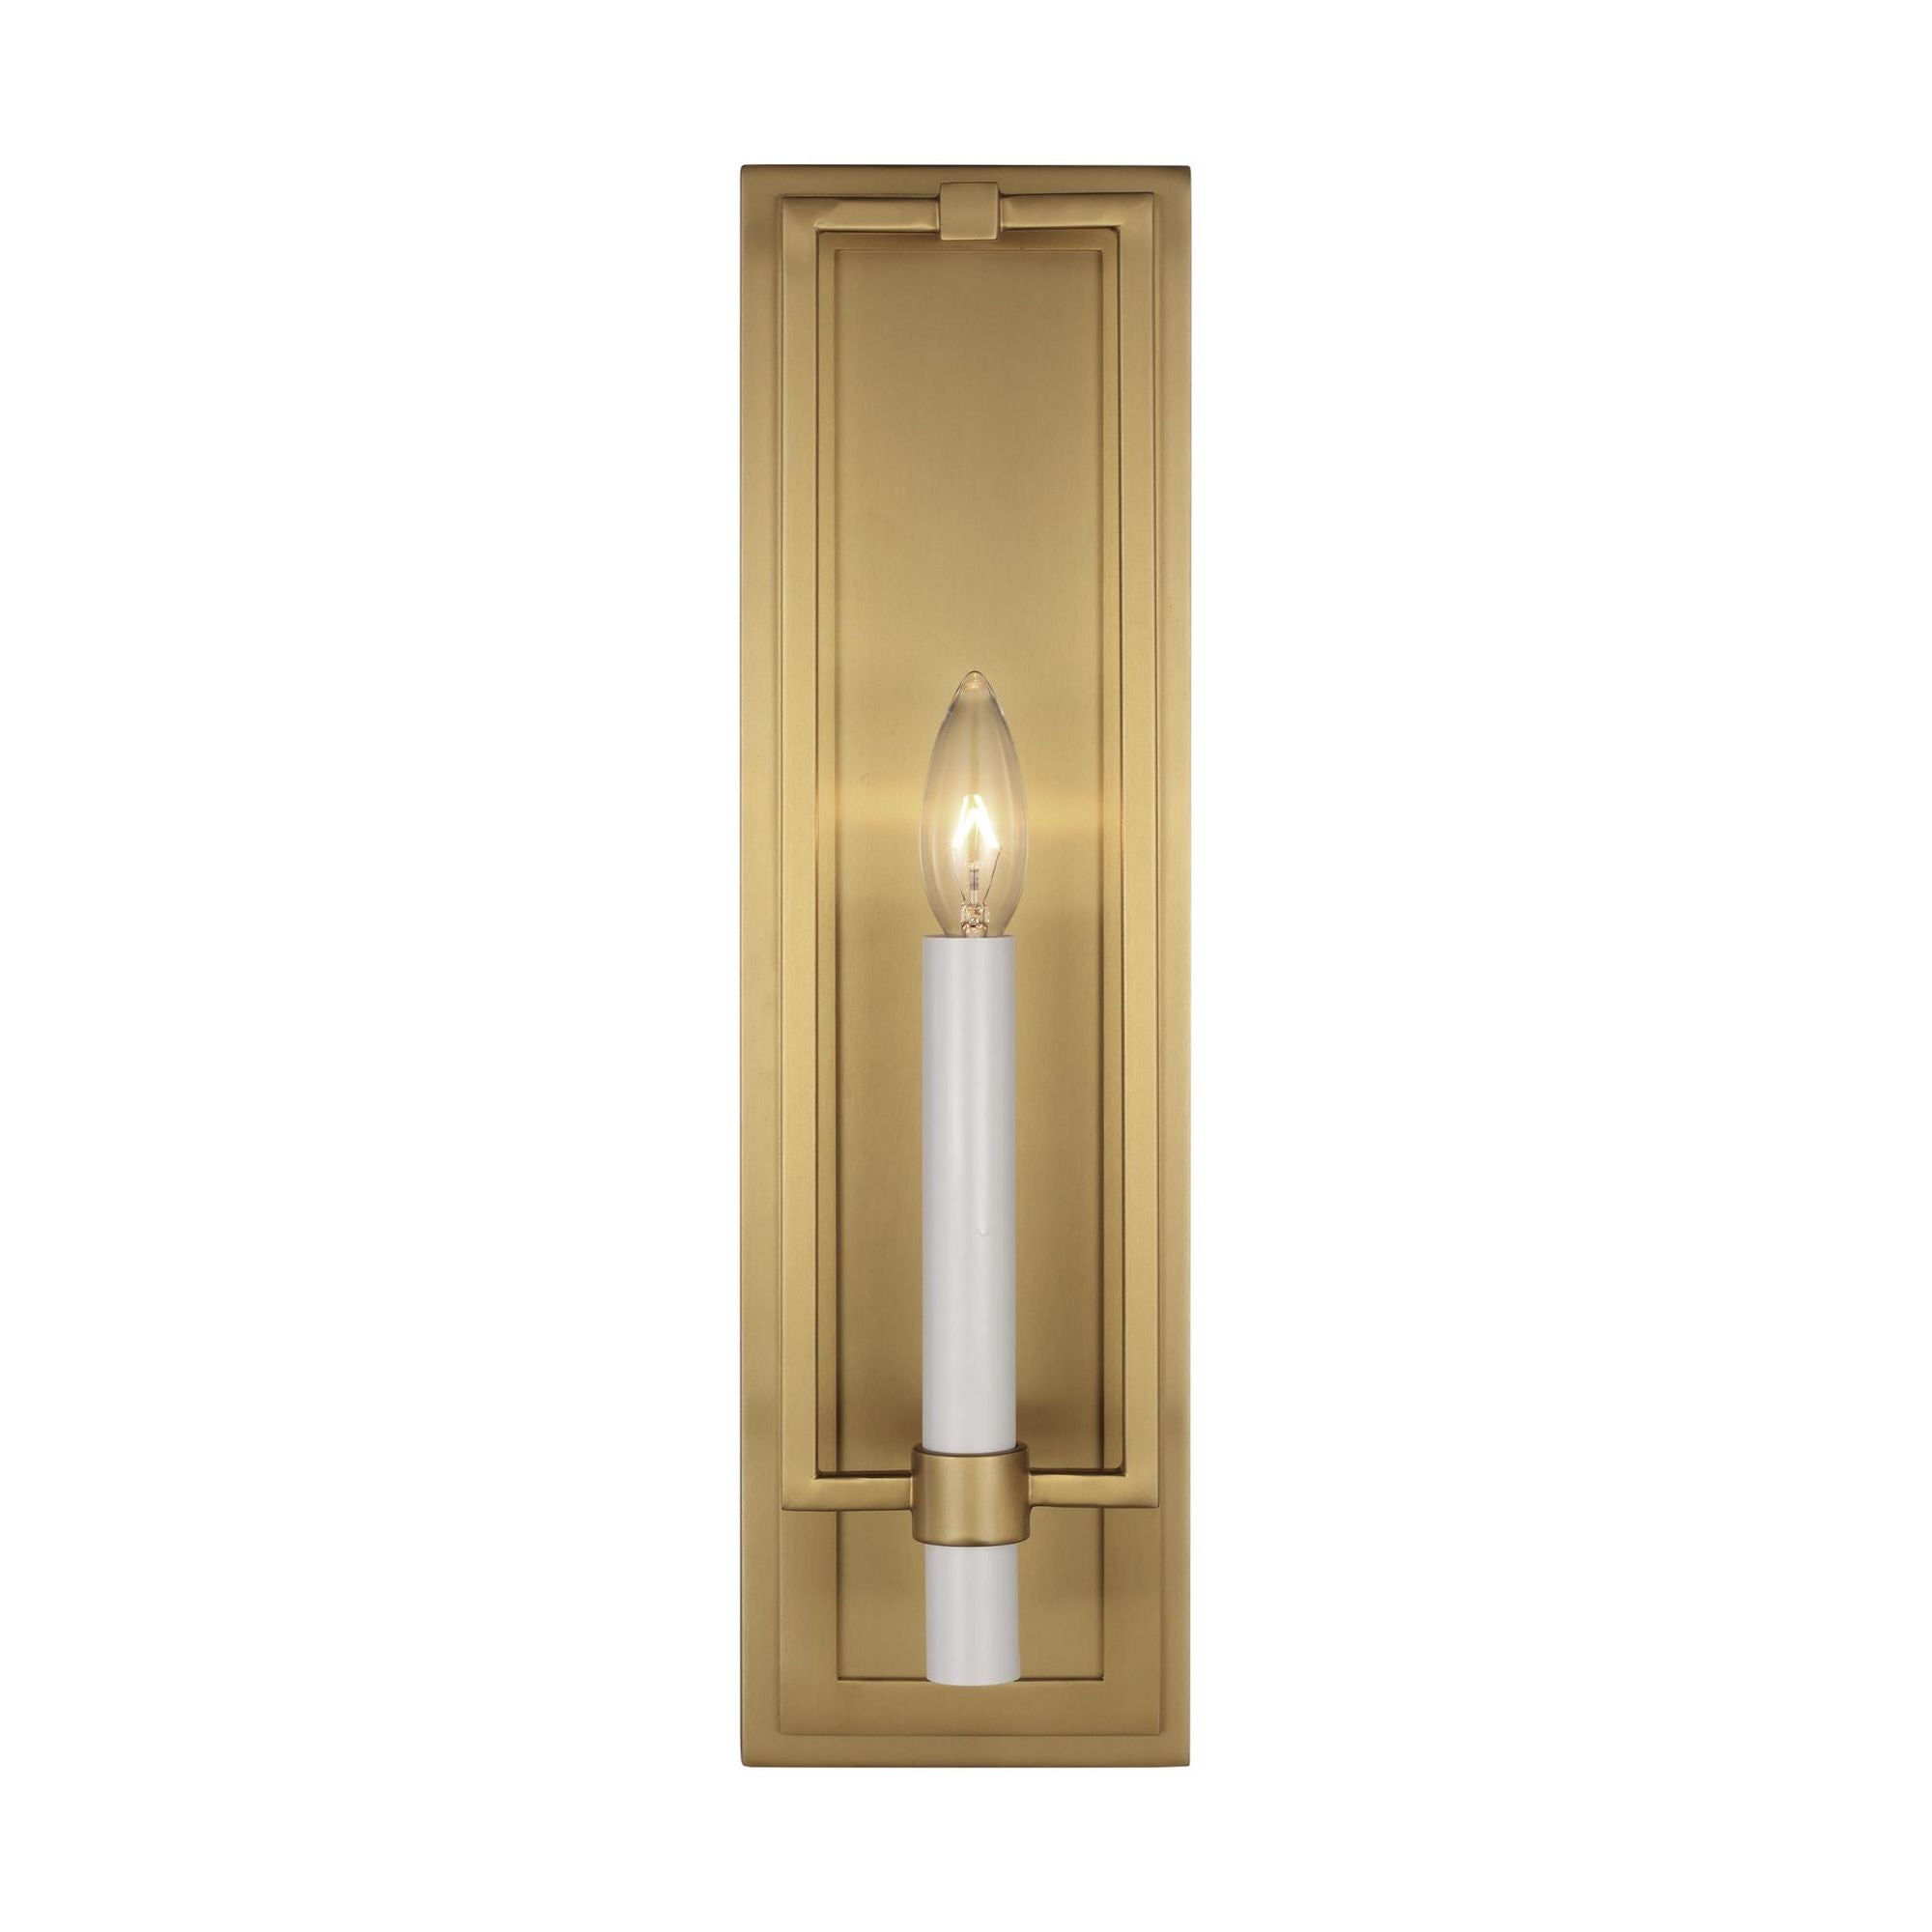 Chapman & Myers Marston Tall Sconce in Burnished Brass